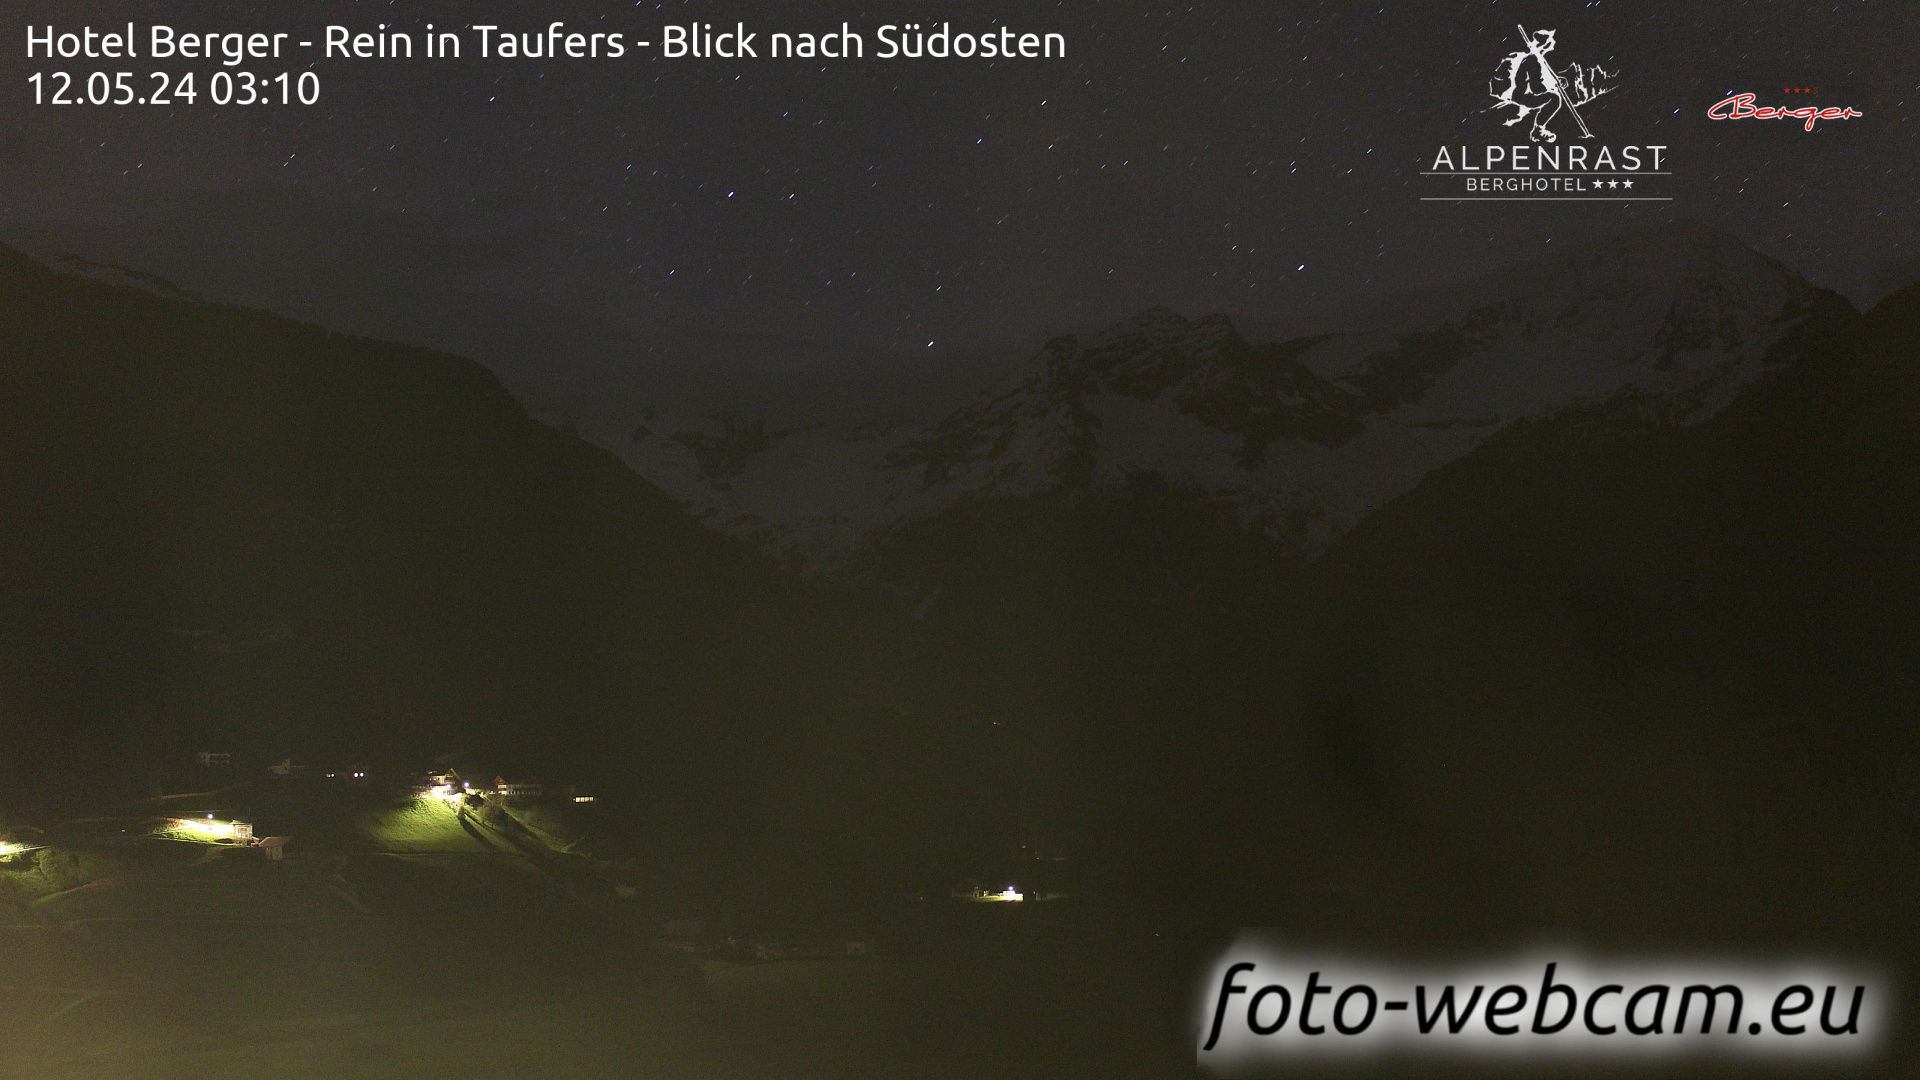 Rein in Taufers Do. 03:11